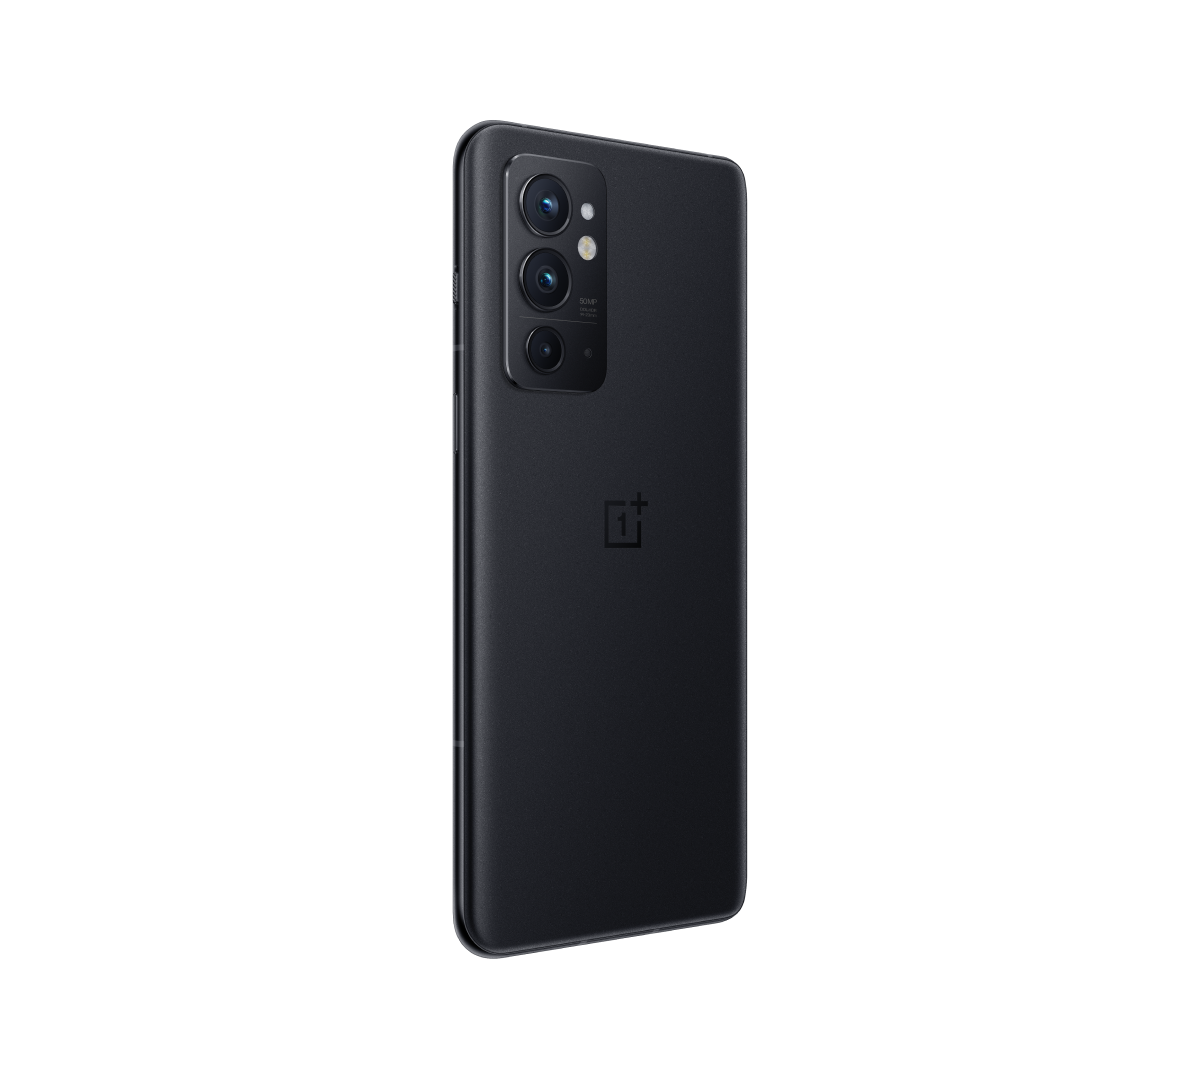 OnePlus 9RT 5G Global Rom  Snapdragon 888 6.62 inch 120Hz E4 AMOLED Display NFC Android 11 50MP Camera Warp Charge 65T Smartphone